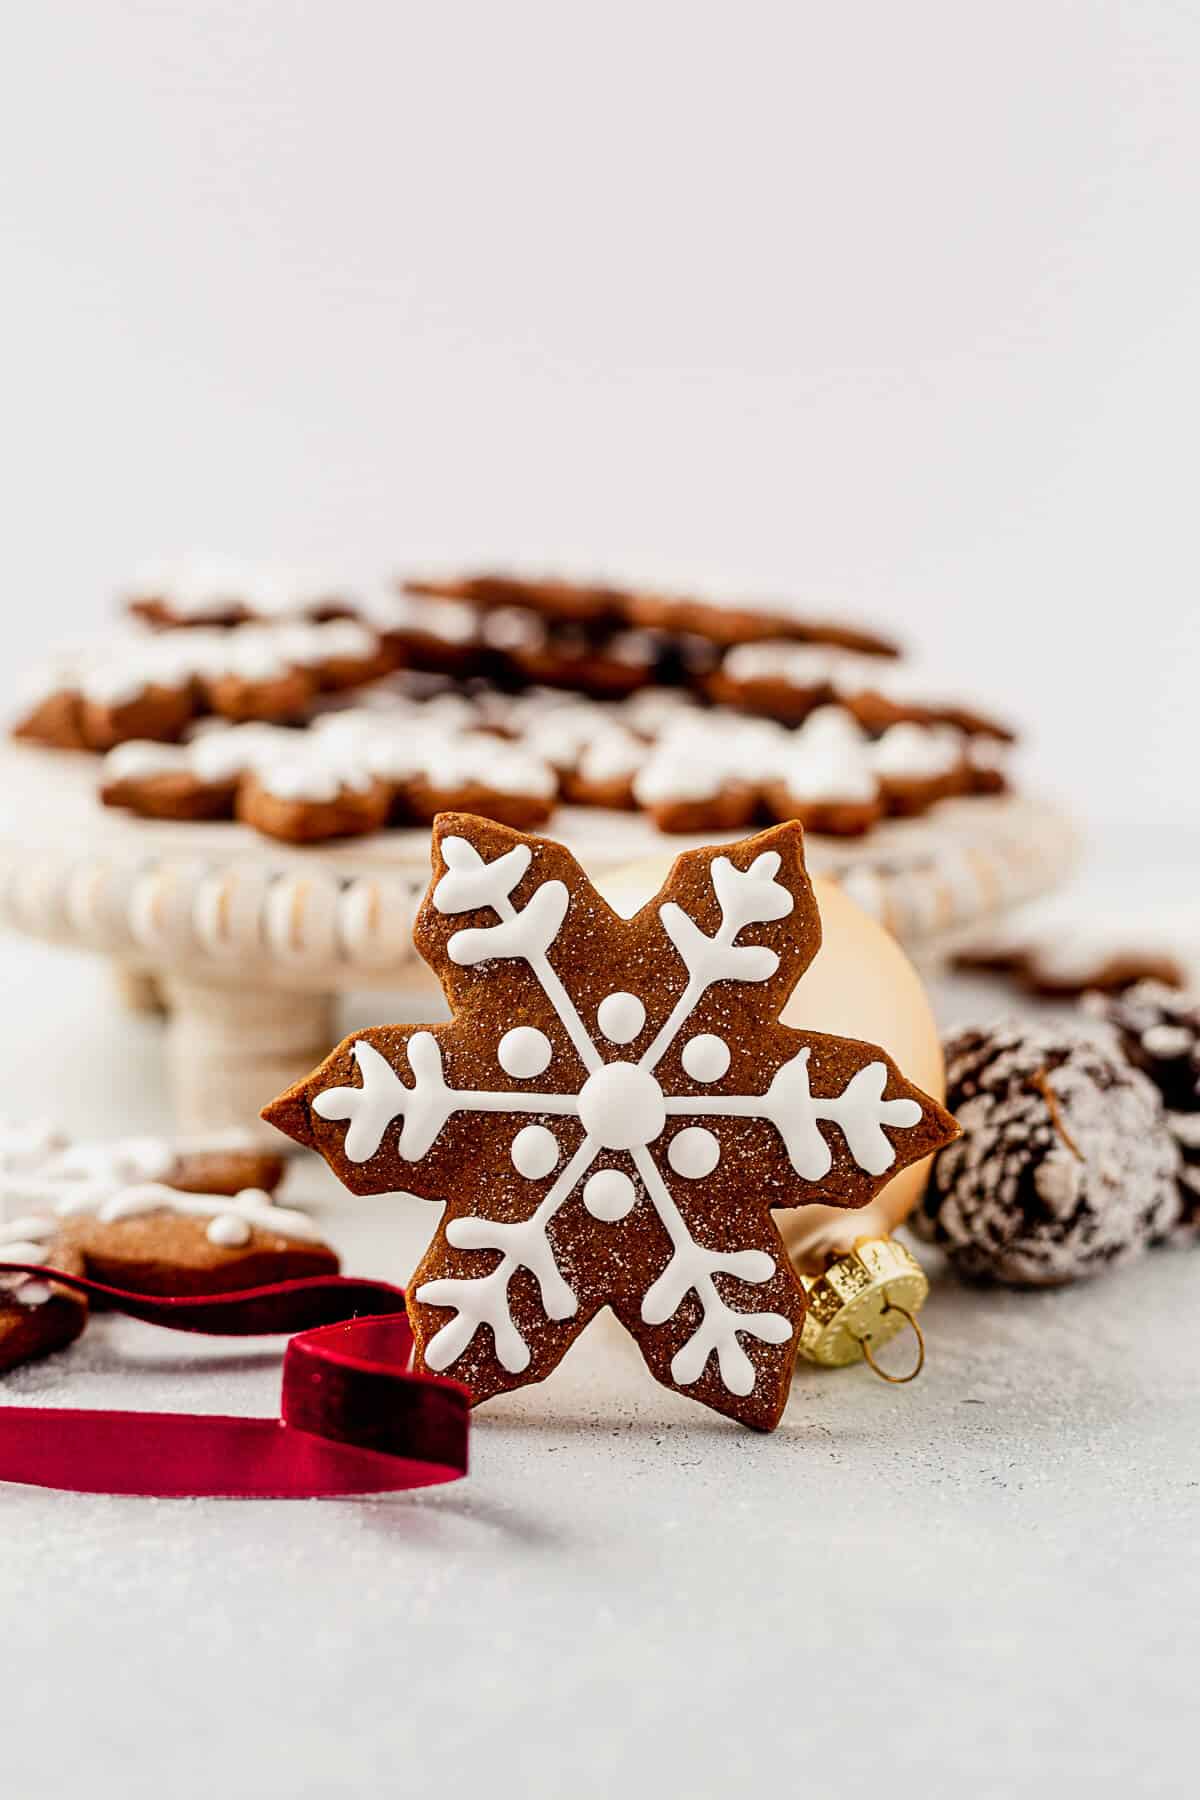 a gingerbread snowflake cookie standing up against a tray of more cookies